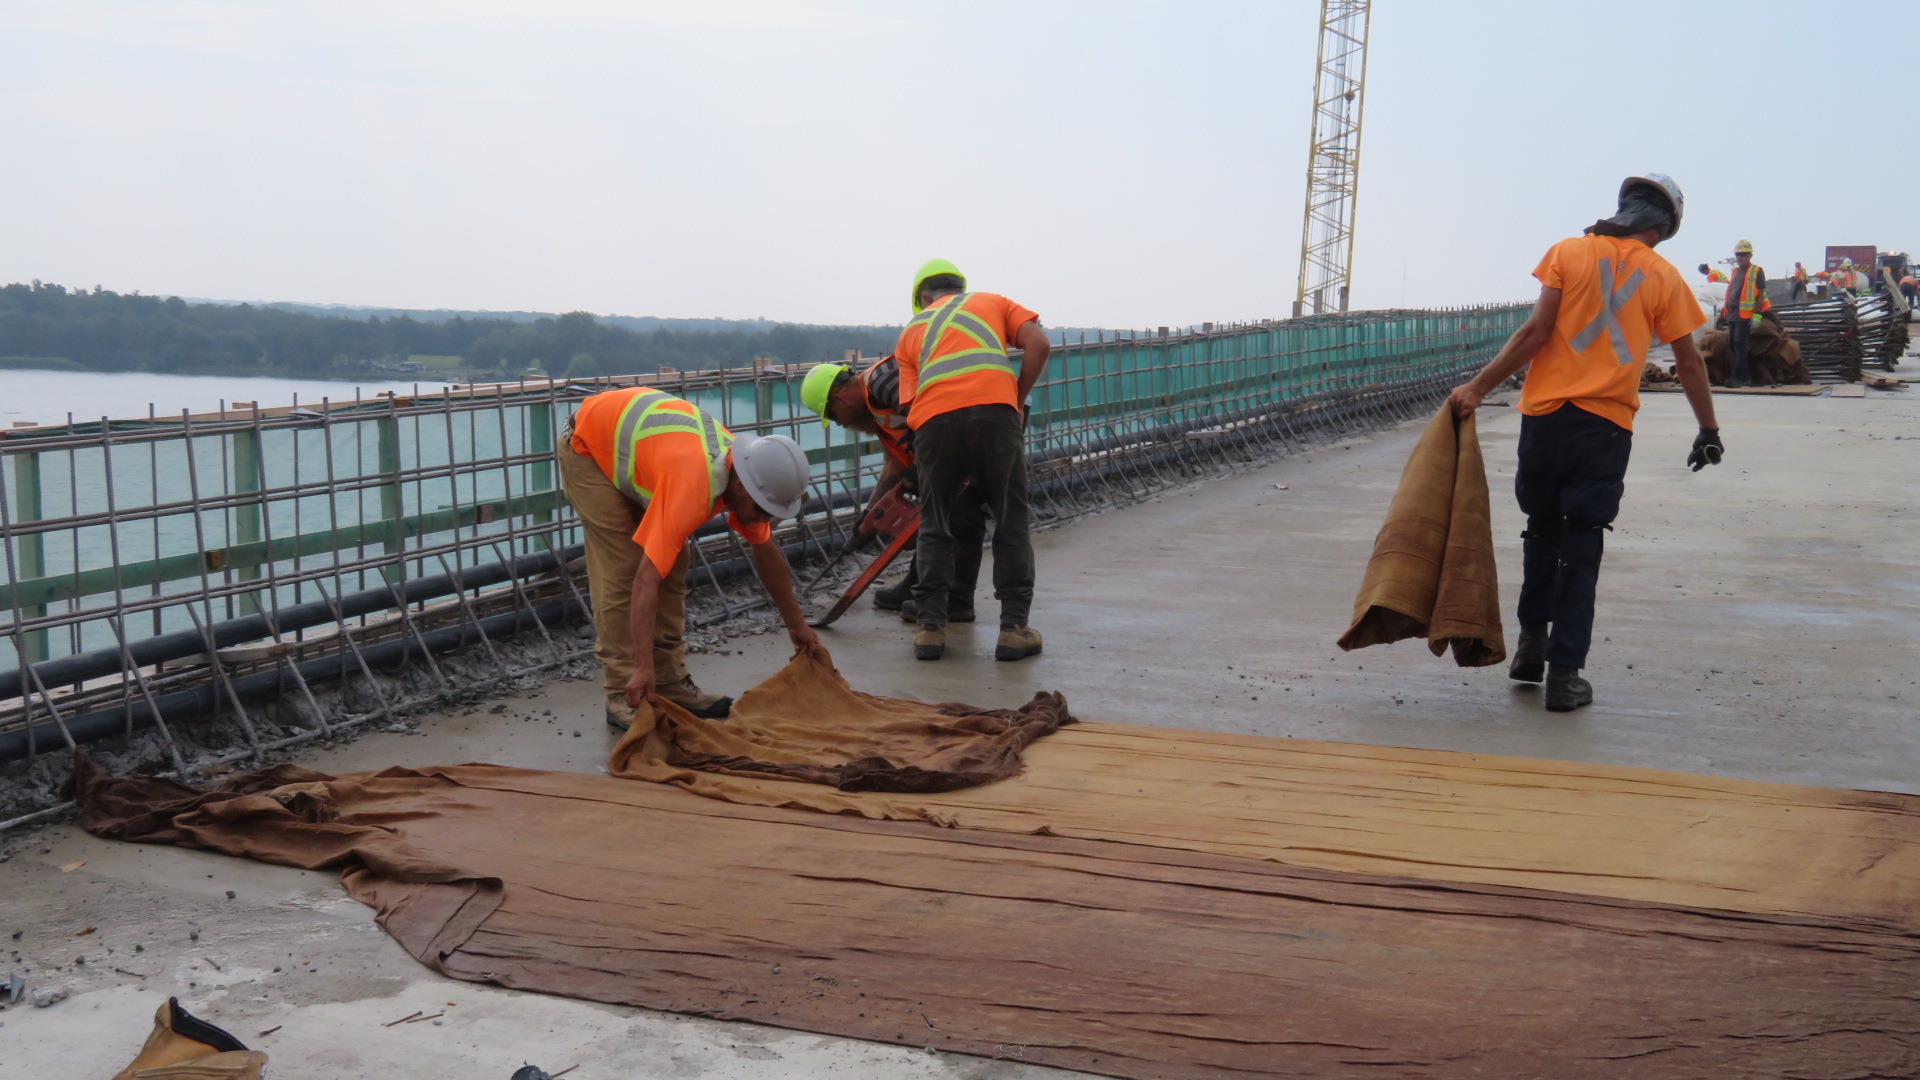 Removing the burlap from the cured bridge deck